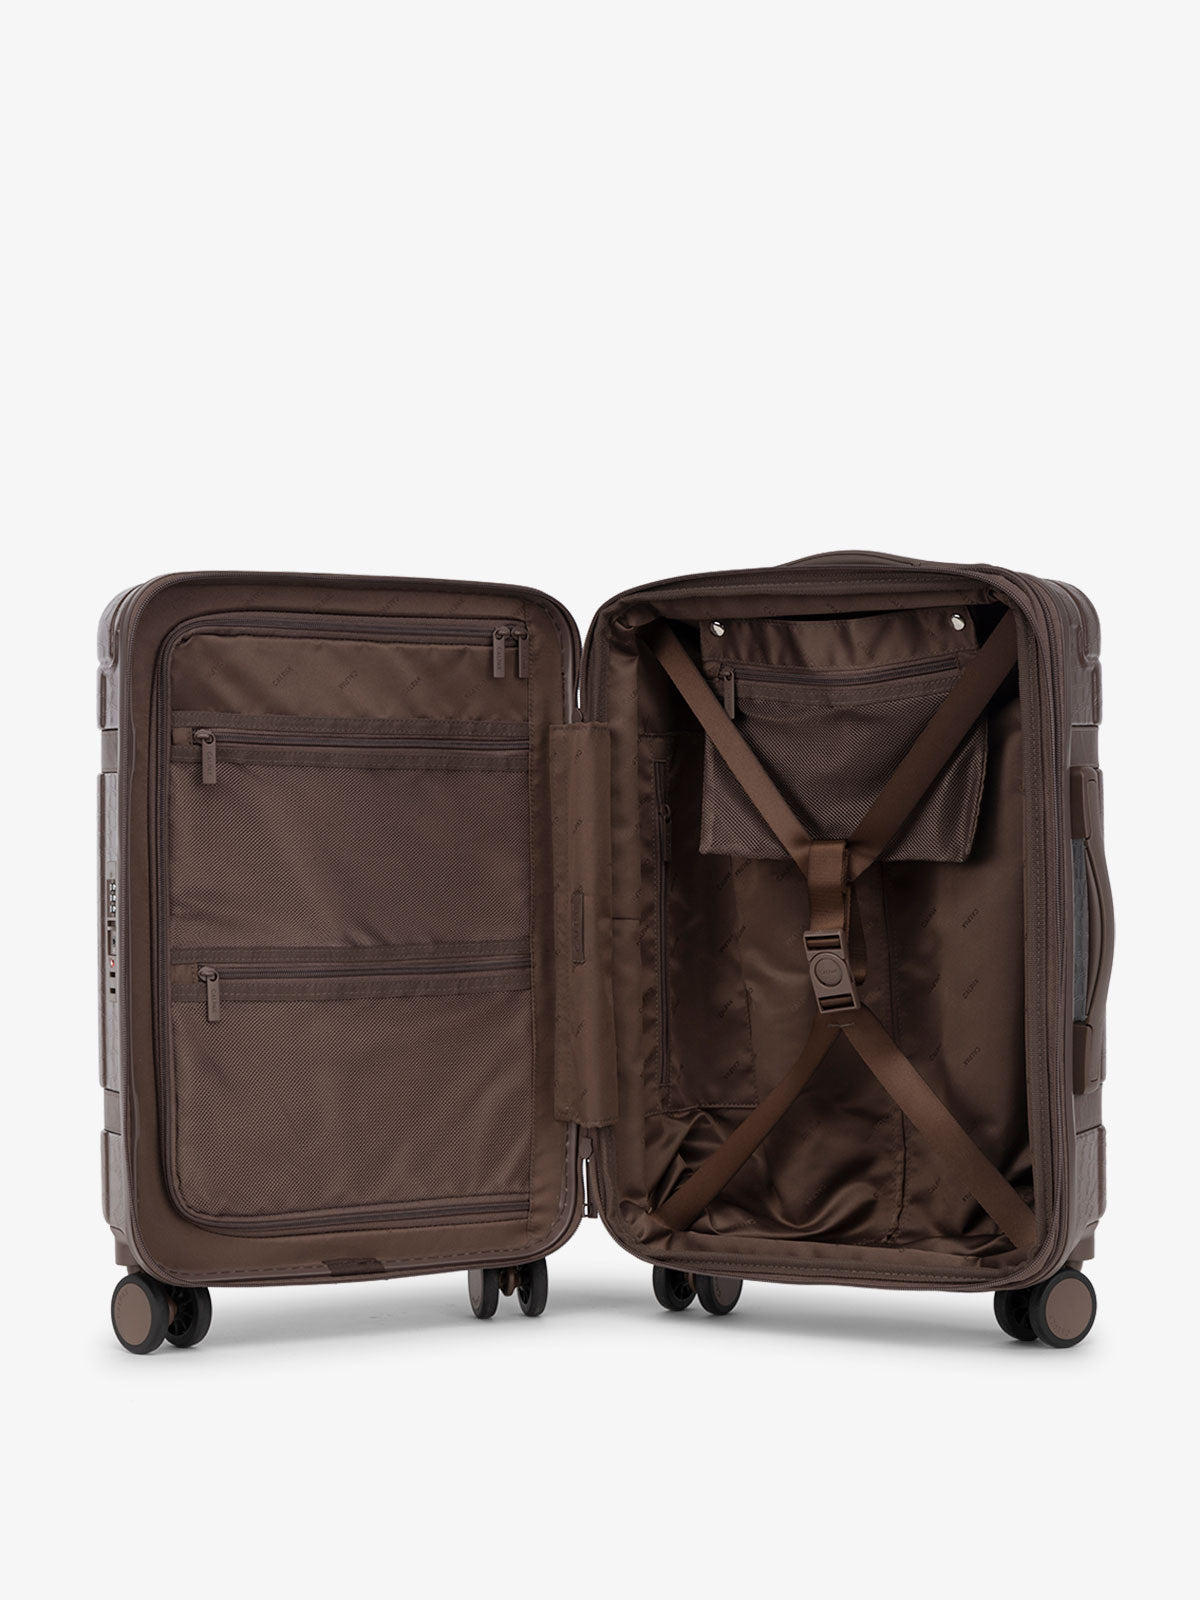 CALPAK TRNK luggage with multiple interior pockets and compression strap apart of 2 piece luggage set in brown